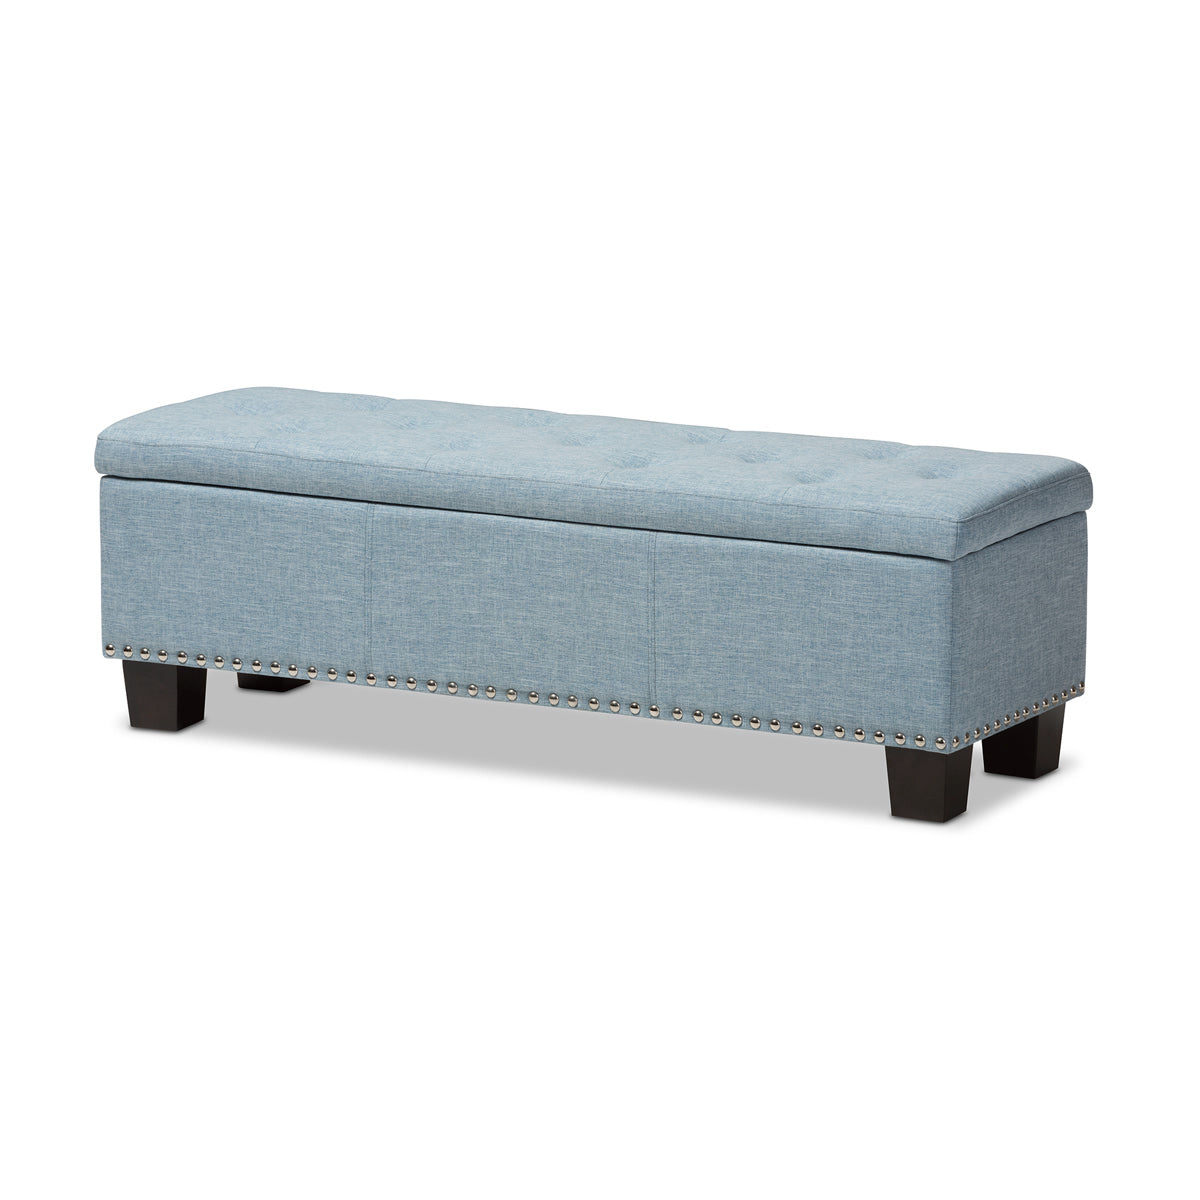 Baxton Studio Hannah Modern and Contemporary Light Blue Fabric Upholstered Button-Tufting Storage Ottoman Bench Baxton Studio-benches-Minimal And Modern - 2